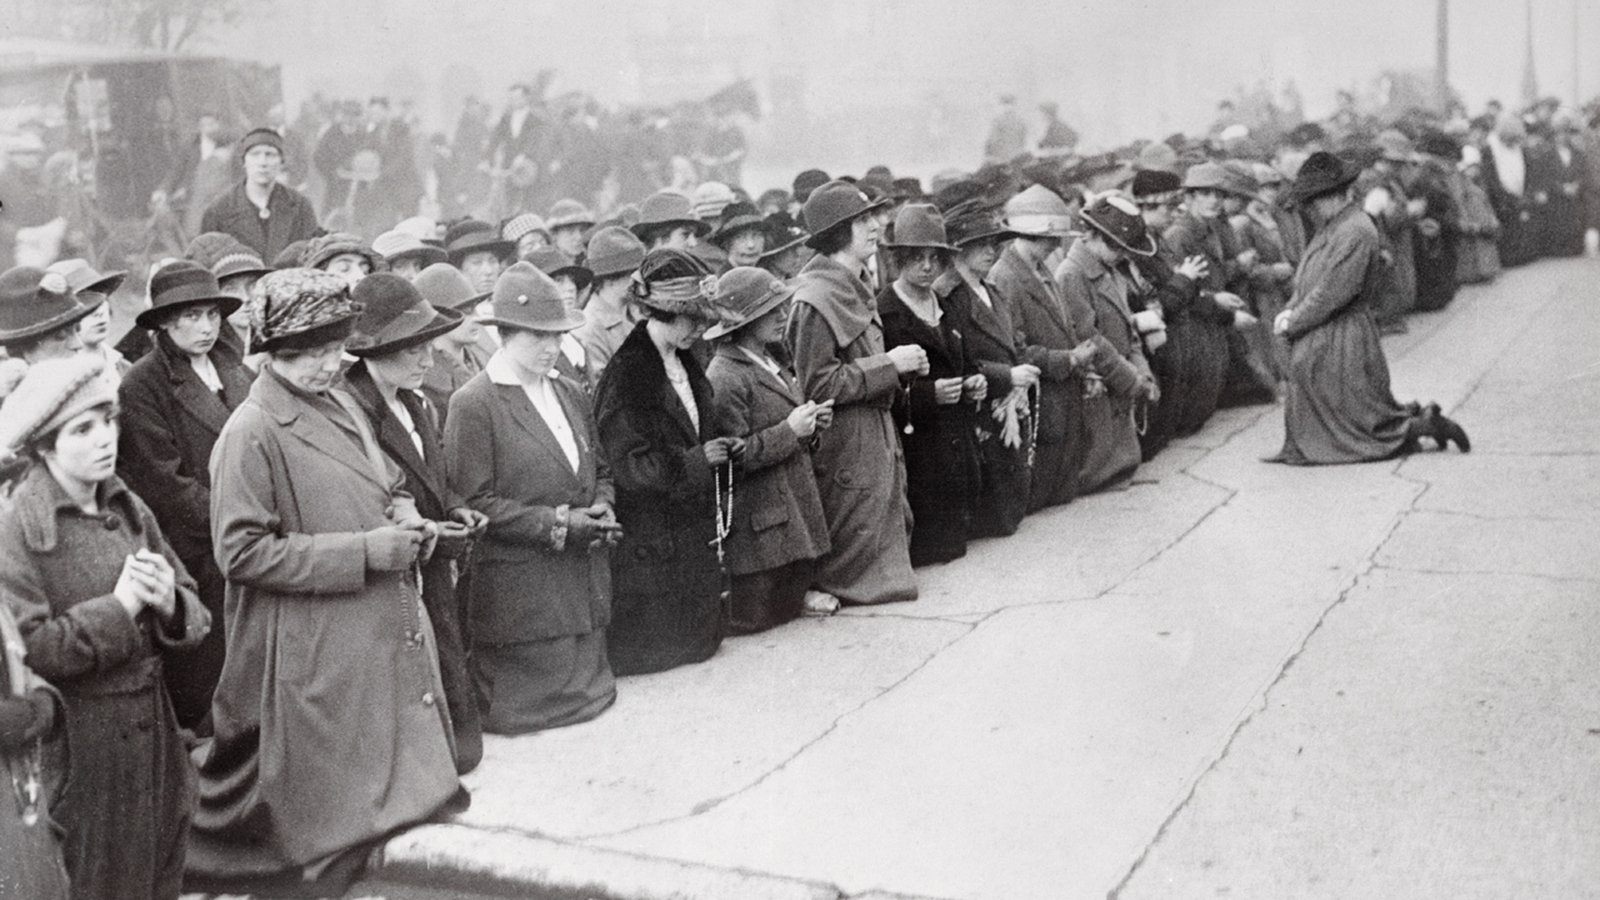 Image - Women pray in streets as Kevin Barry is hanged